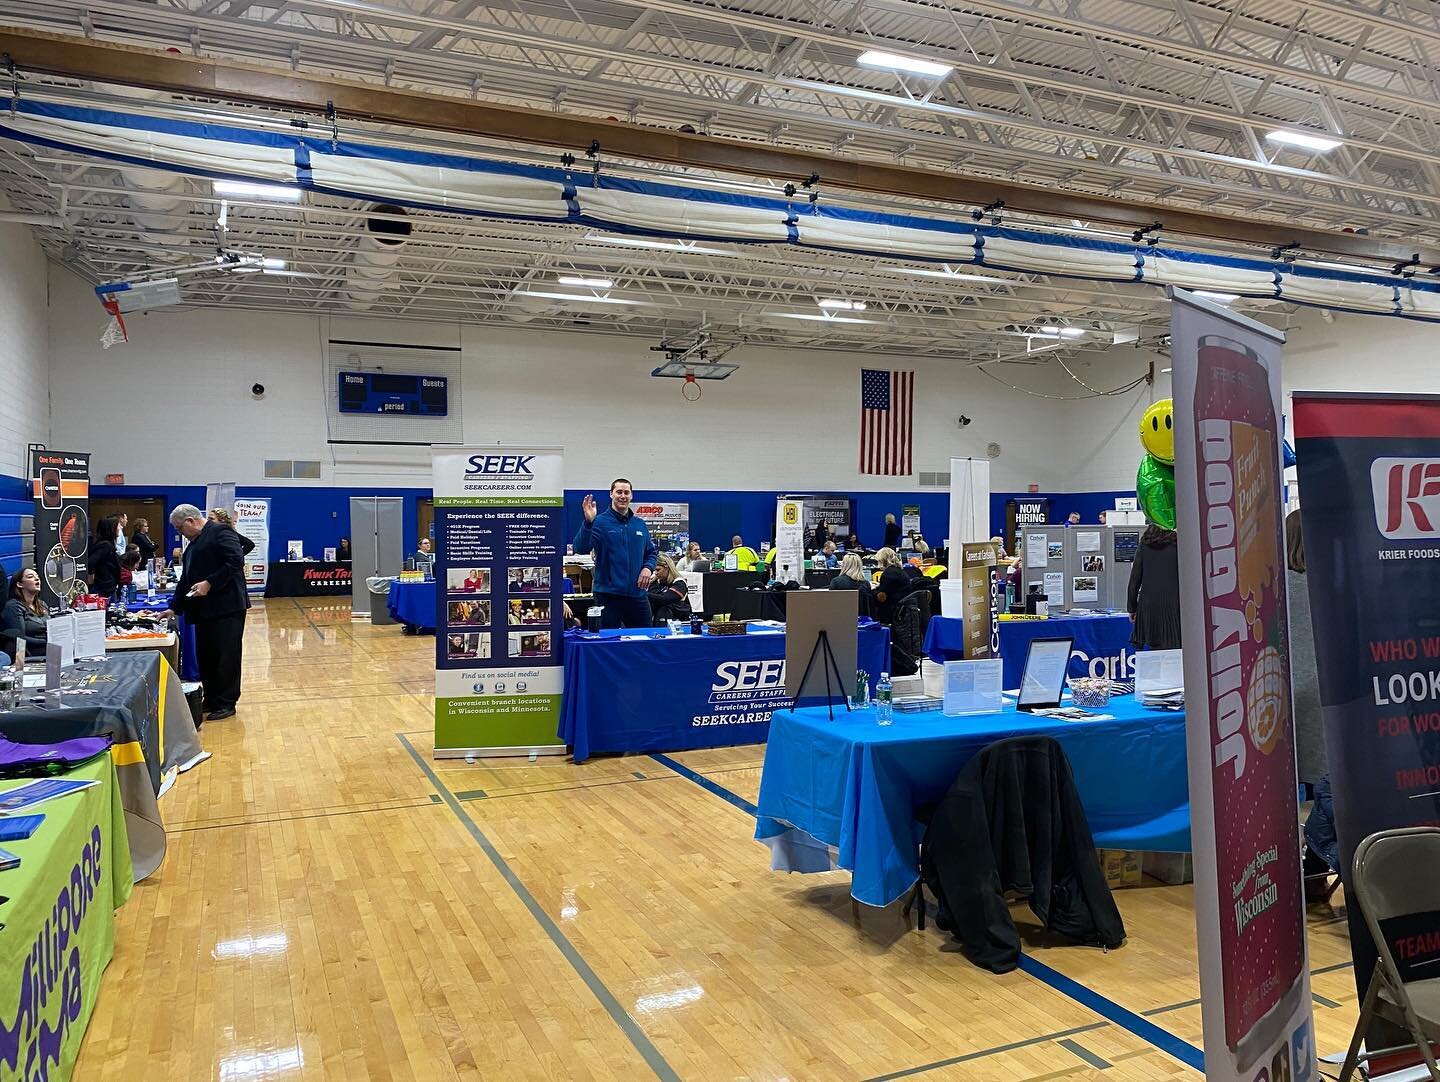 Come scope out the Job Fair today until 4 pm! There are 50 employers with over 100 available job opportunities for you to explore. See you soon!